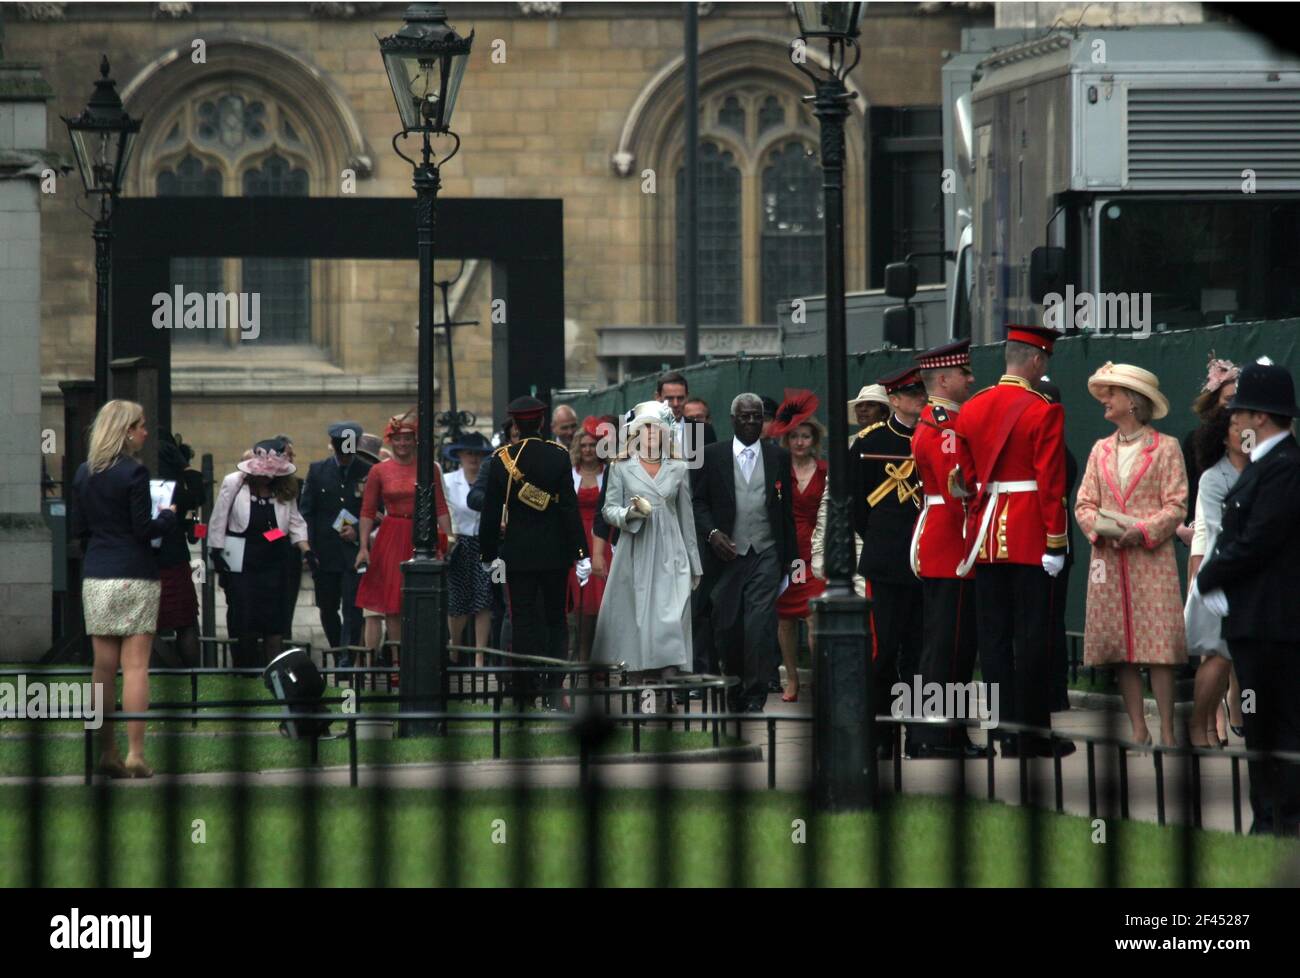 29 April 2011. Westminster Abbey, London, England. Royal wedding day. Celebrities and VIP guests line up outside Westminster Abbey where they are chec Stock Photo